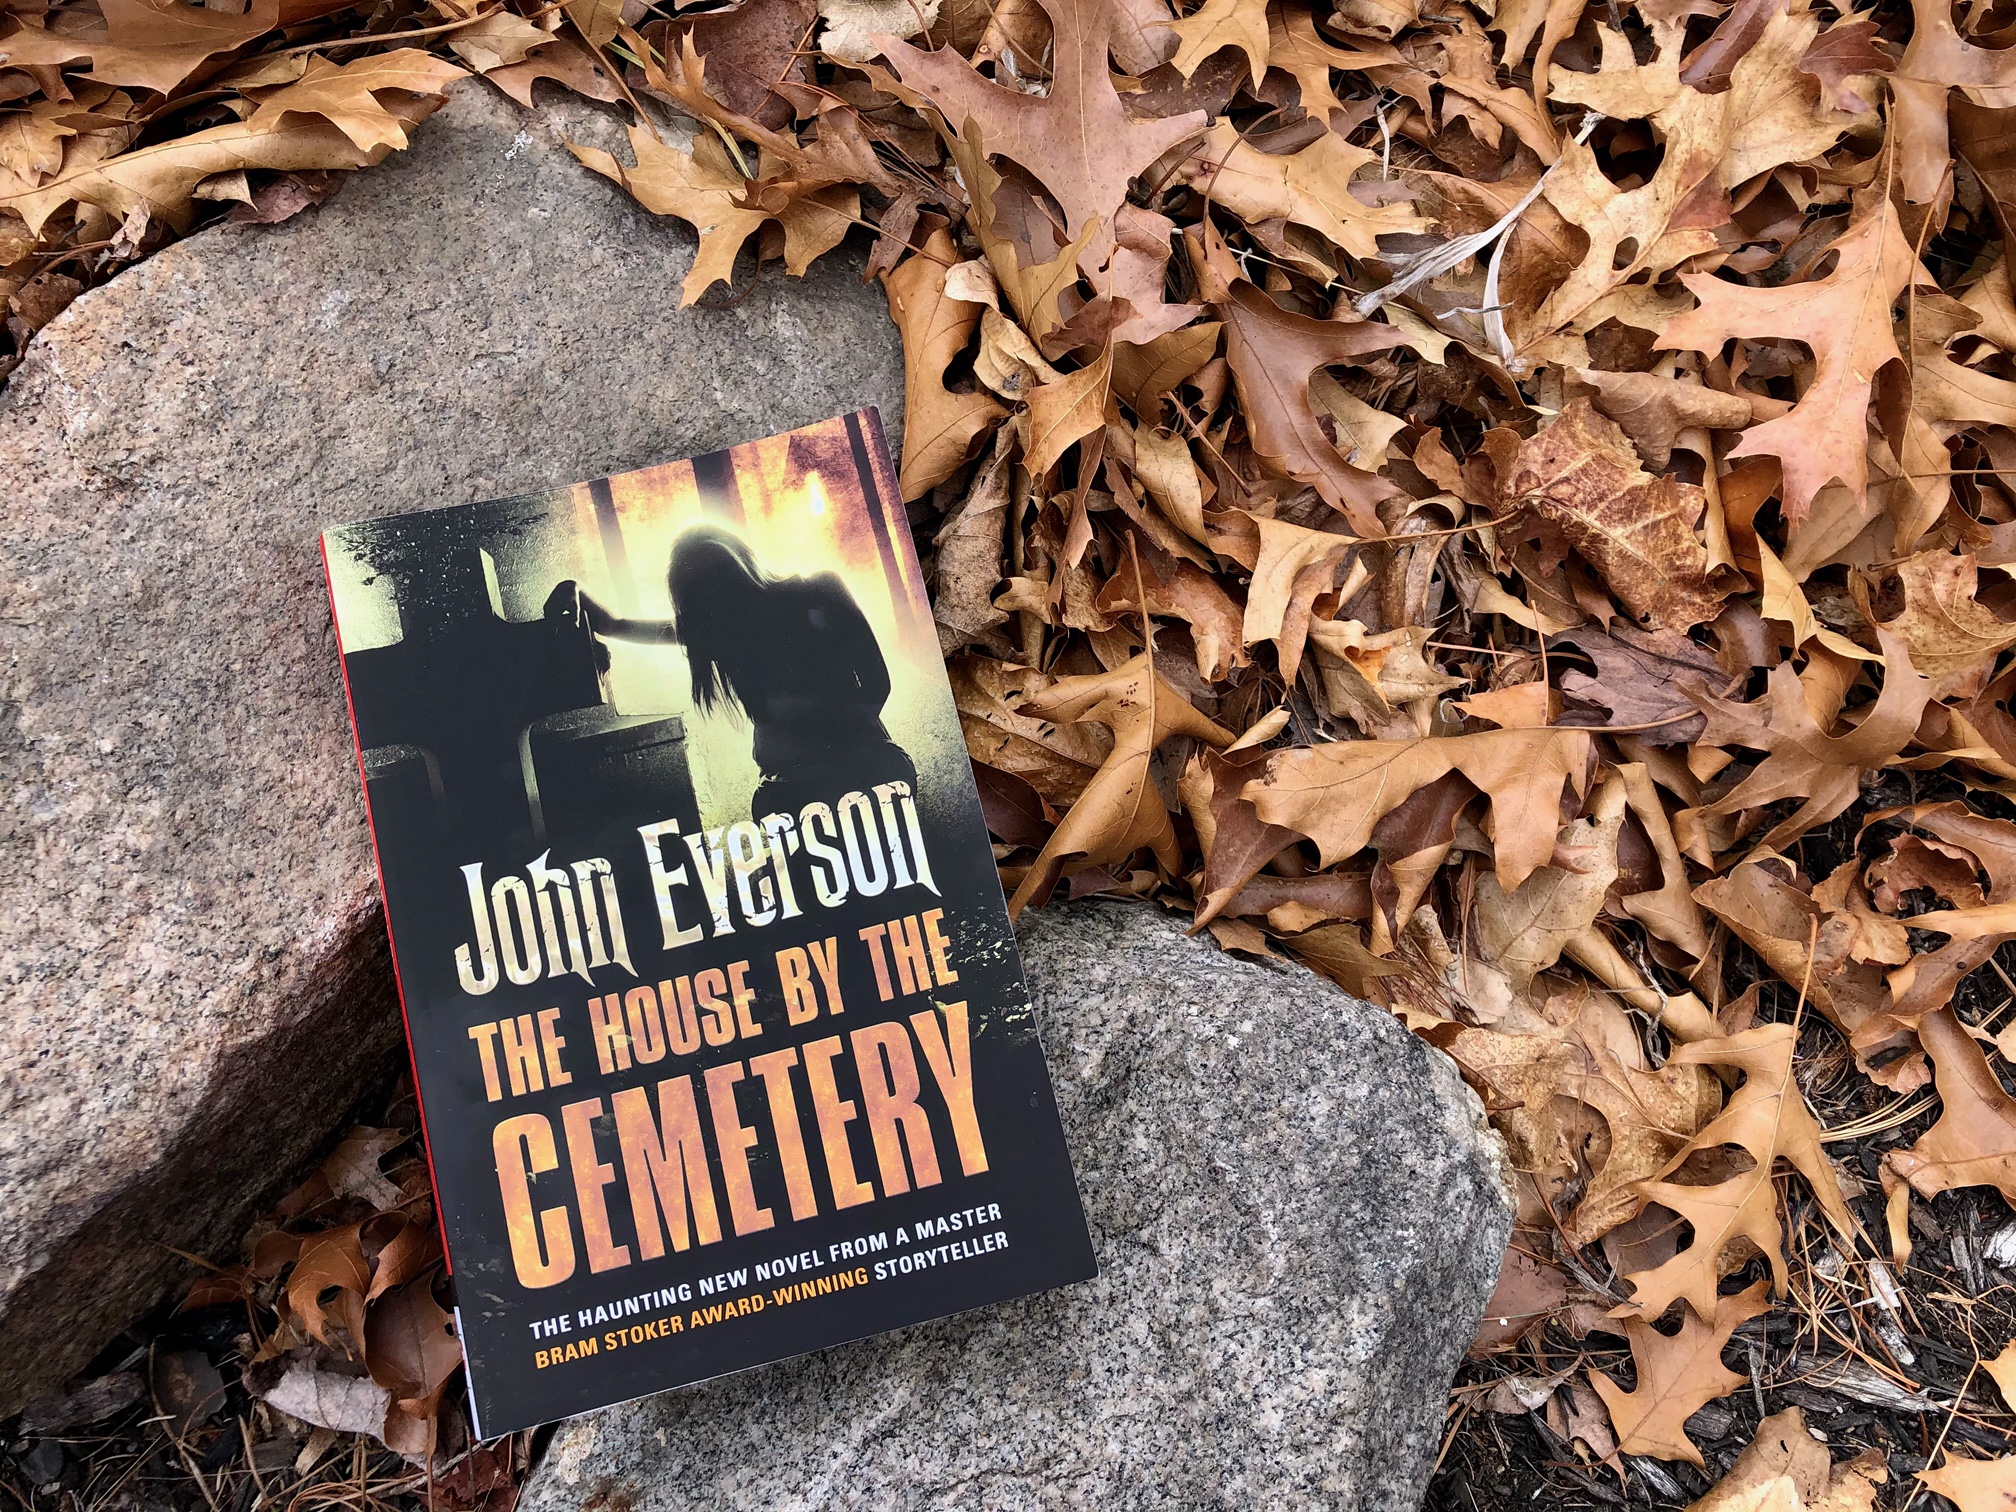 The House By The Cemetery by John Everson book photo by Erica Robyn Reads